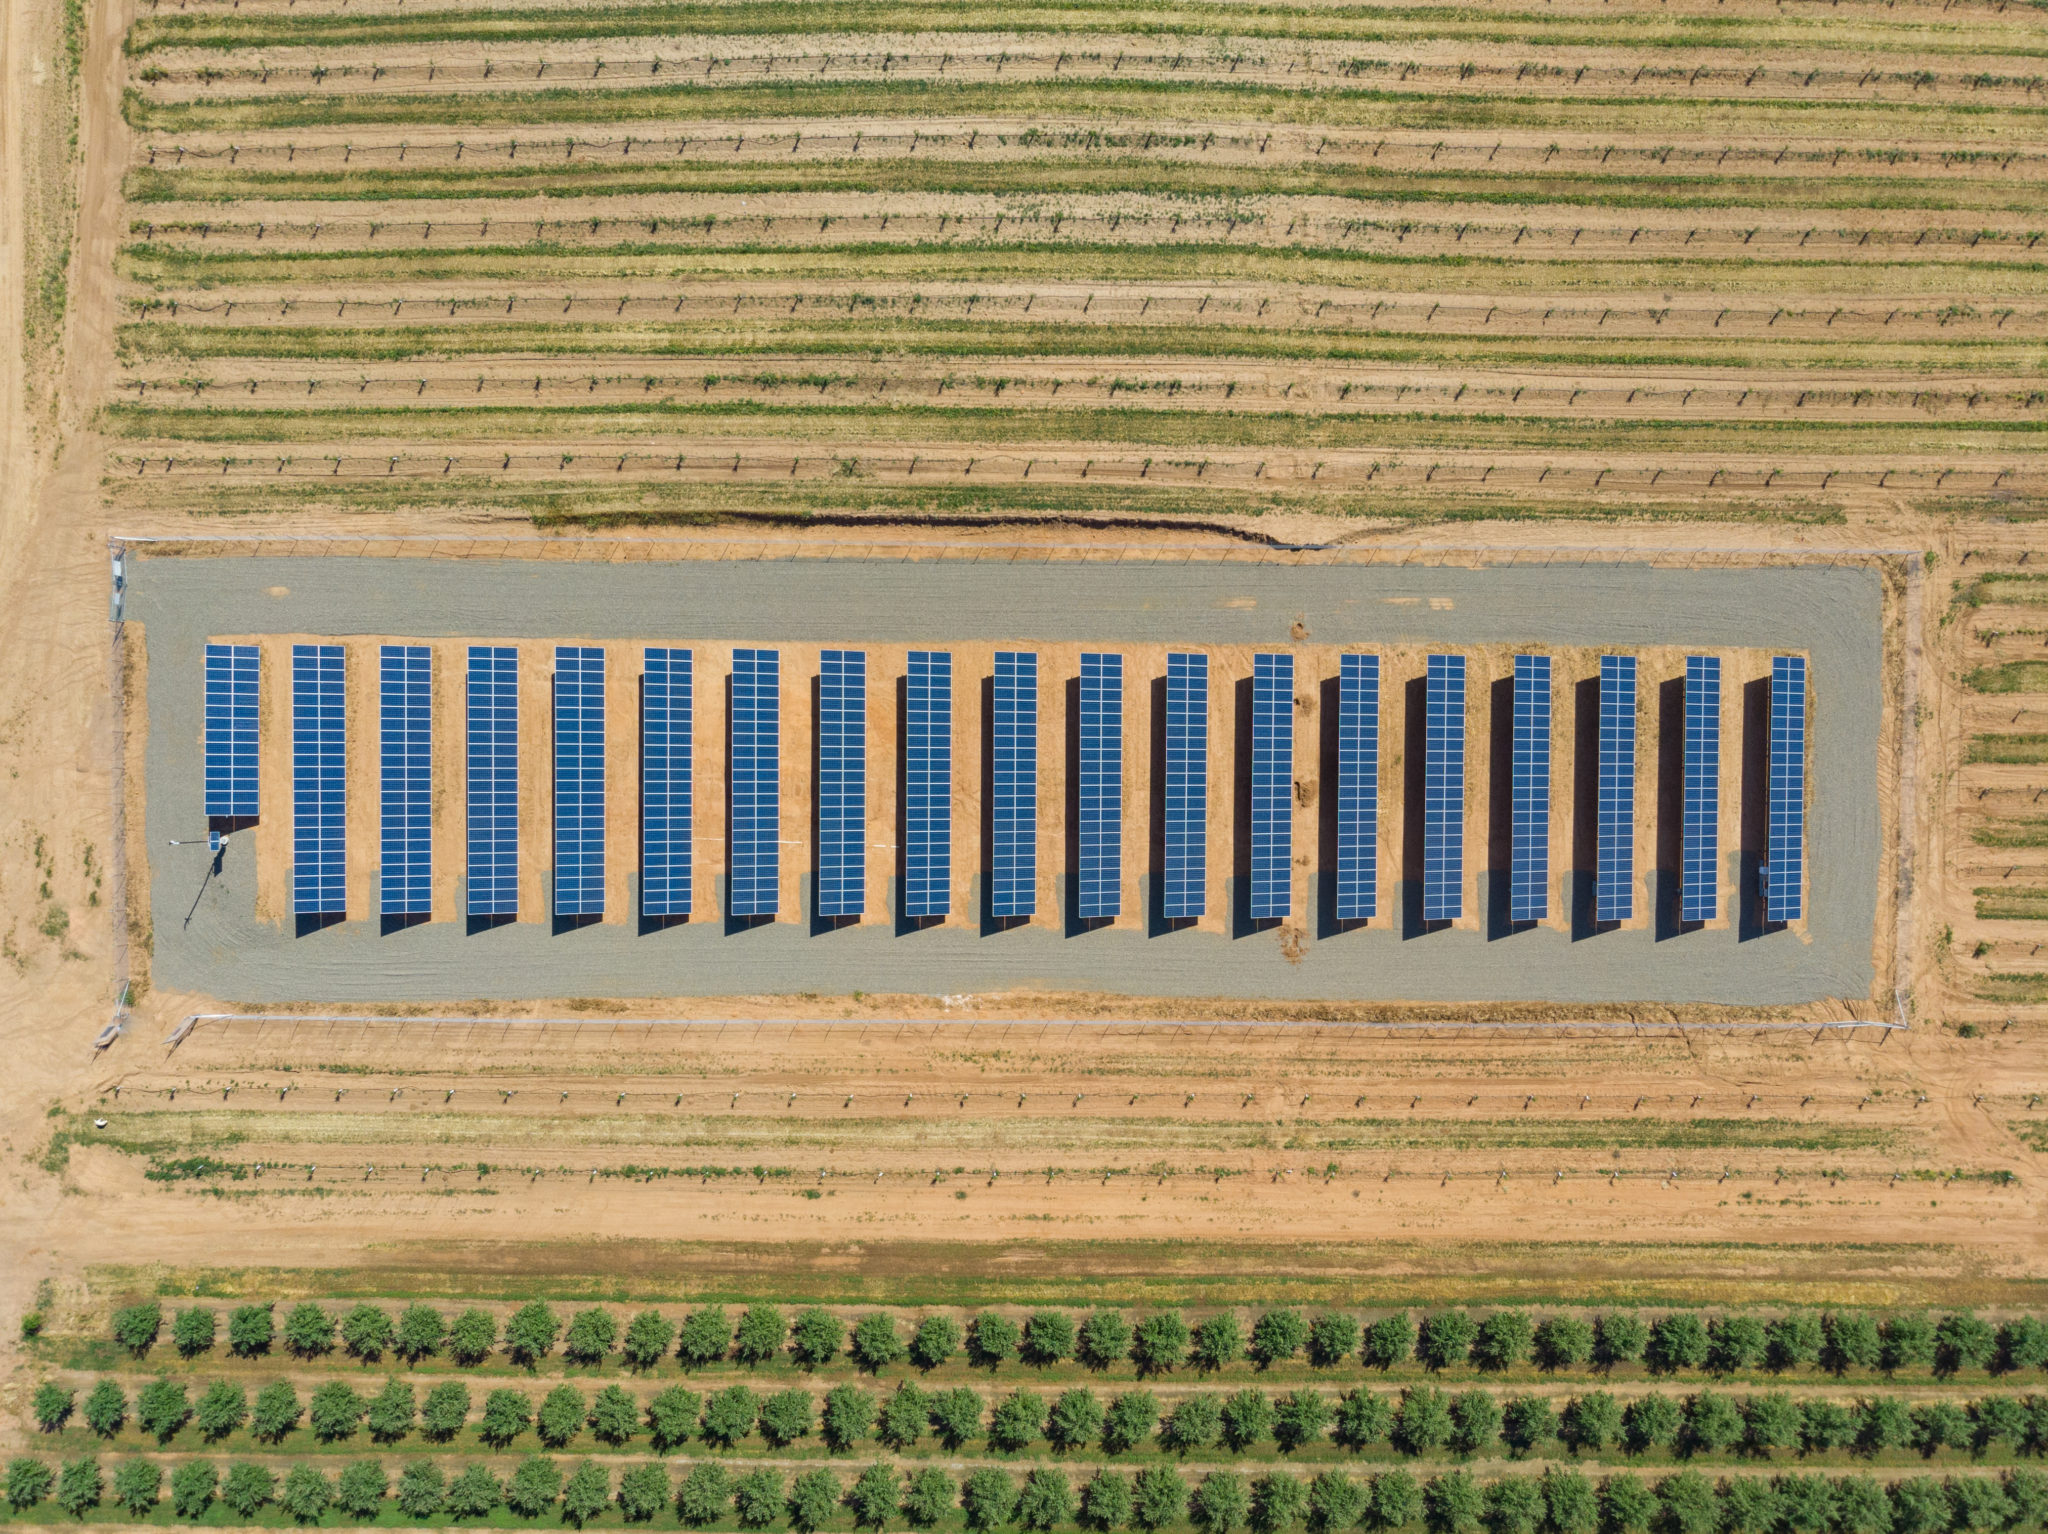 A small solar farm in Gustine, California with rows of crops in the foreground and pasture land in the background.